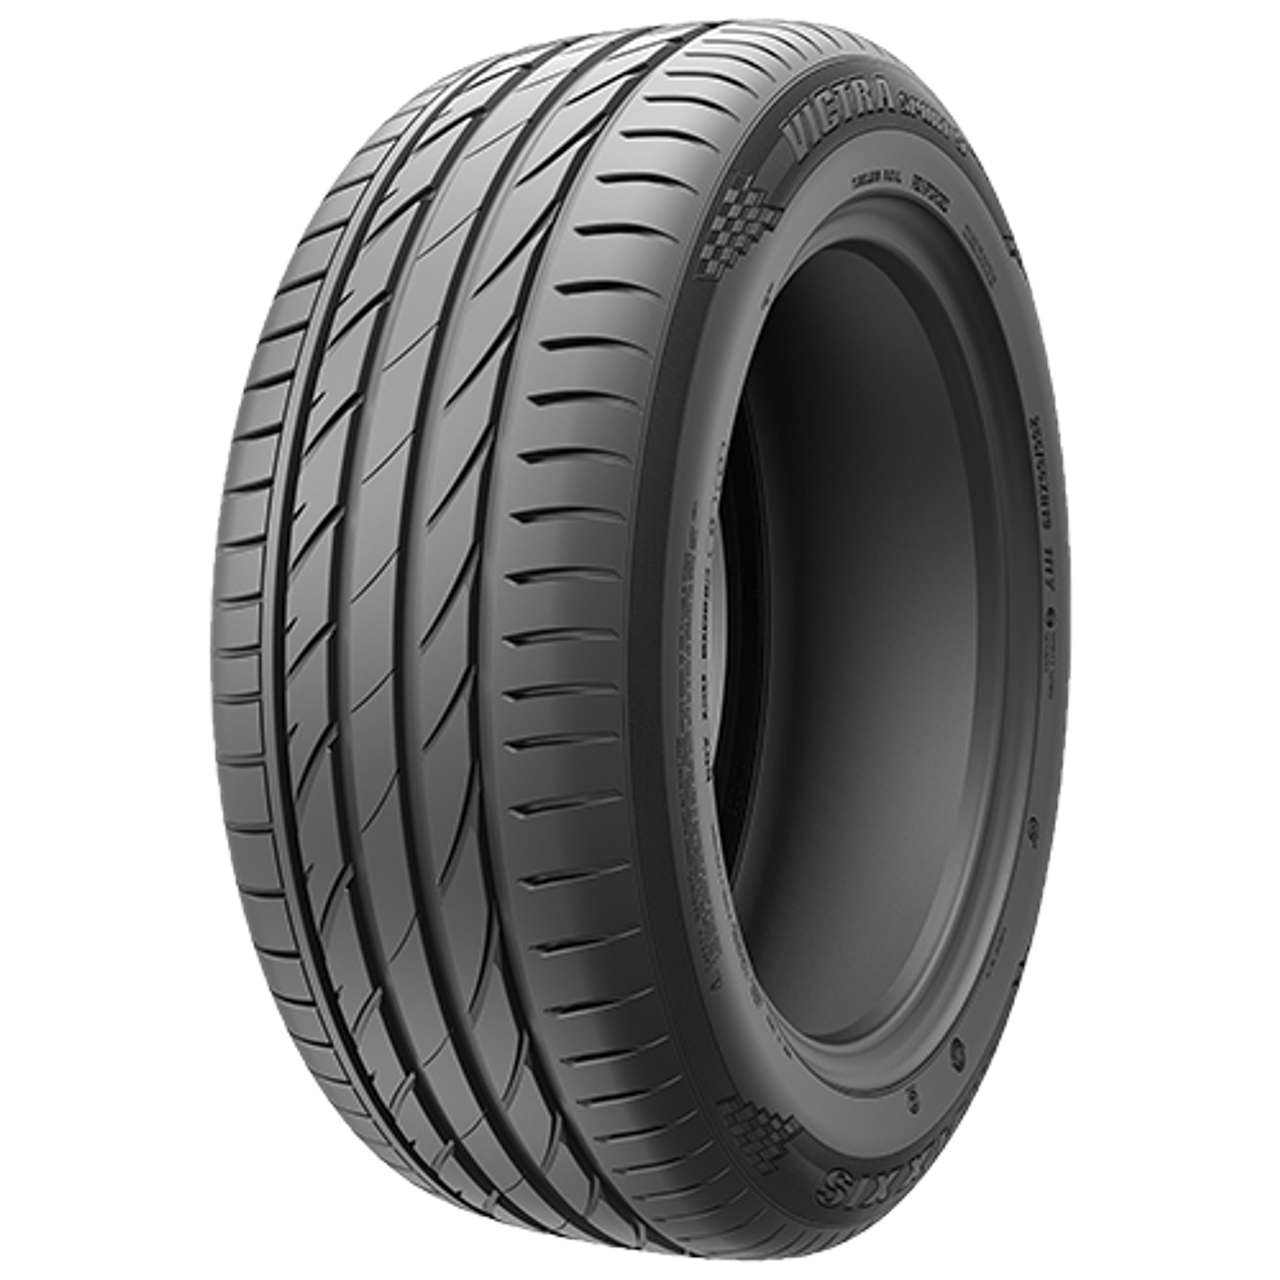 MAXXIS VICTRA SPORT 5 (VS5) SUV 295/40ZR20 110Y MFS BSW